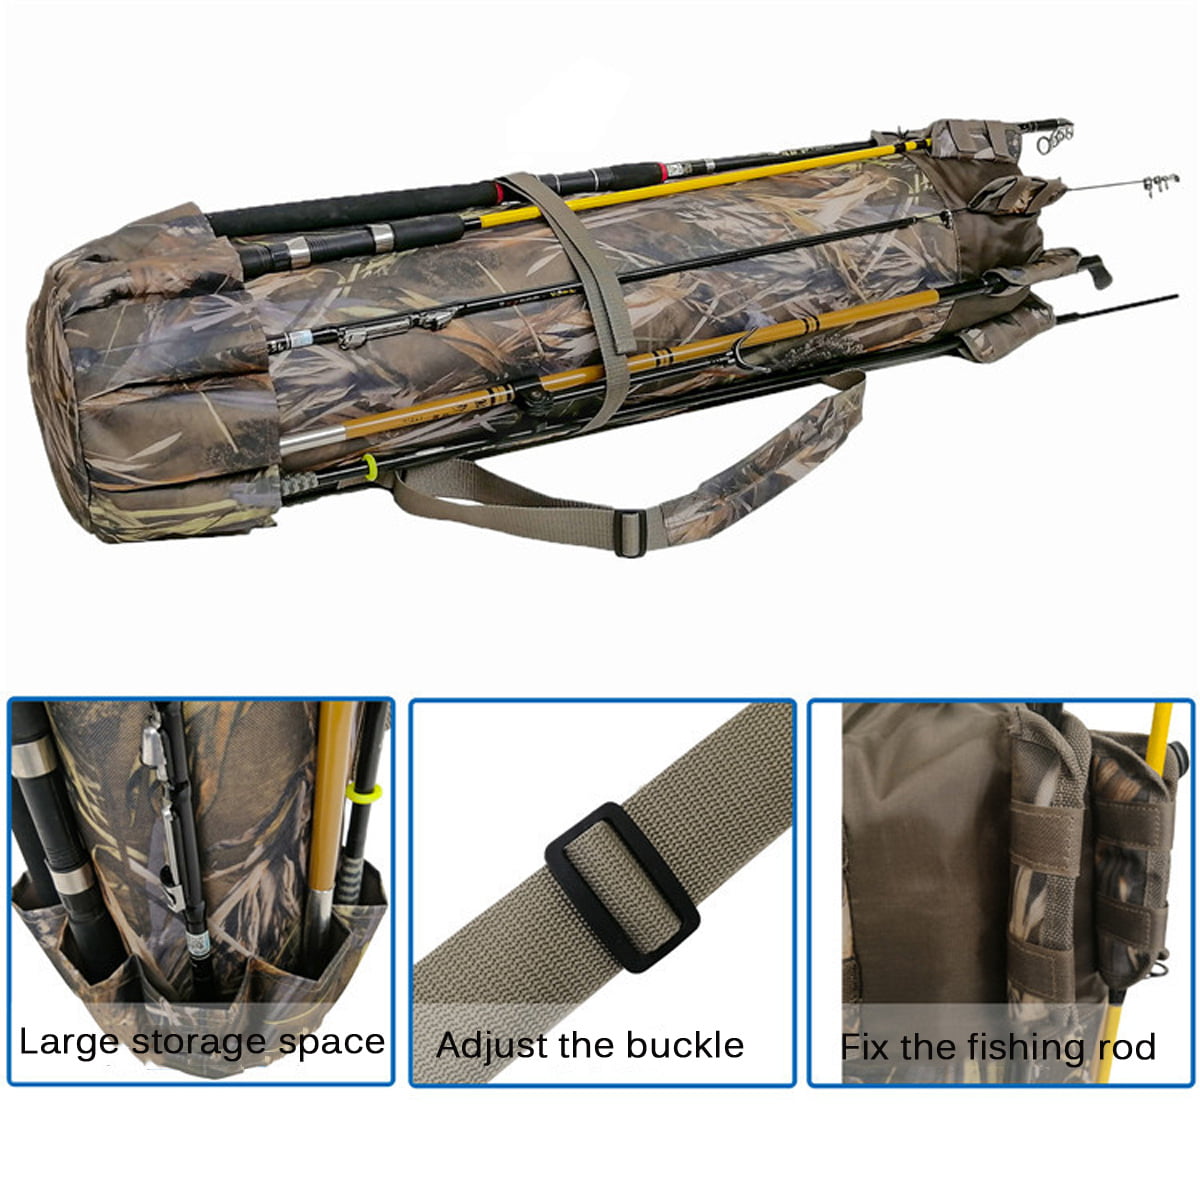 Fishing Tackle Bag Gift for Family Father Friends Fishing Rod /& Reel Organizer Bag Travel Carry Case Bag- Holds 5 Poles /& Tackle culpeo Fishing Bag